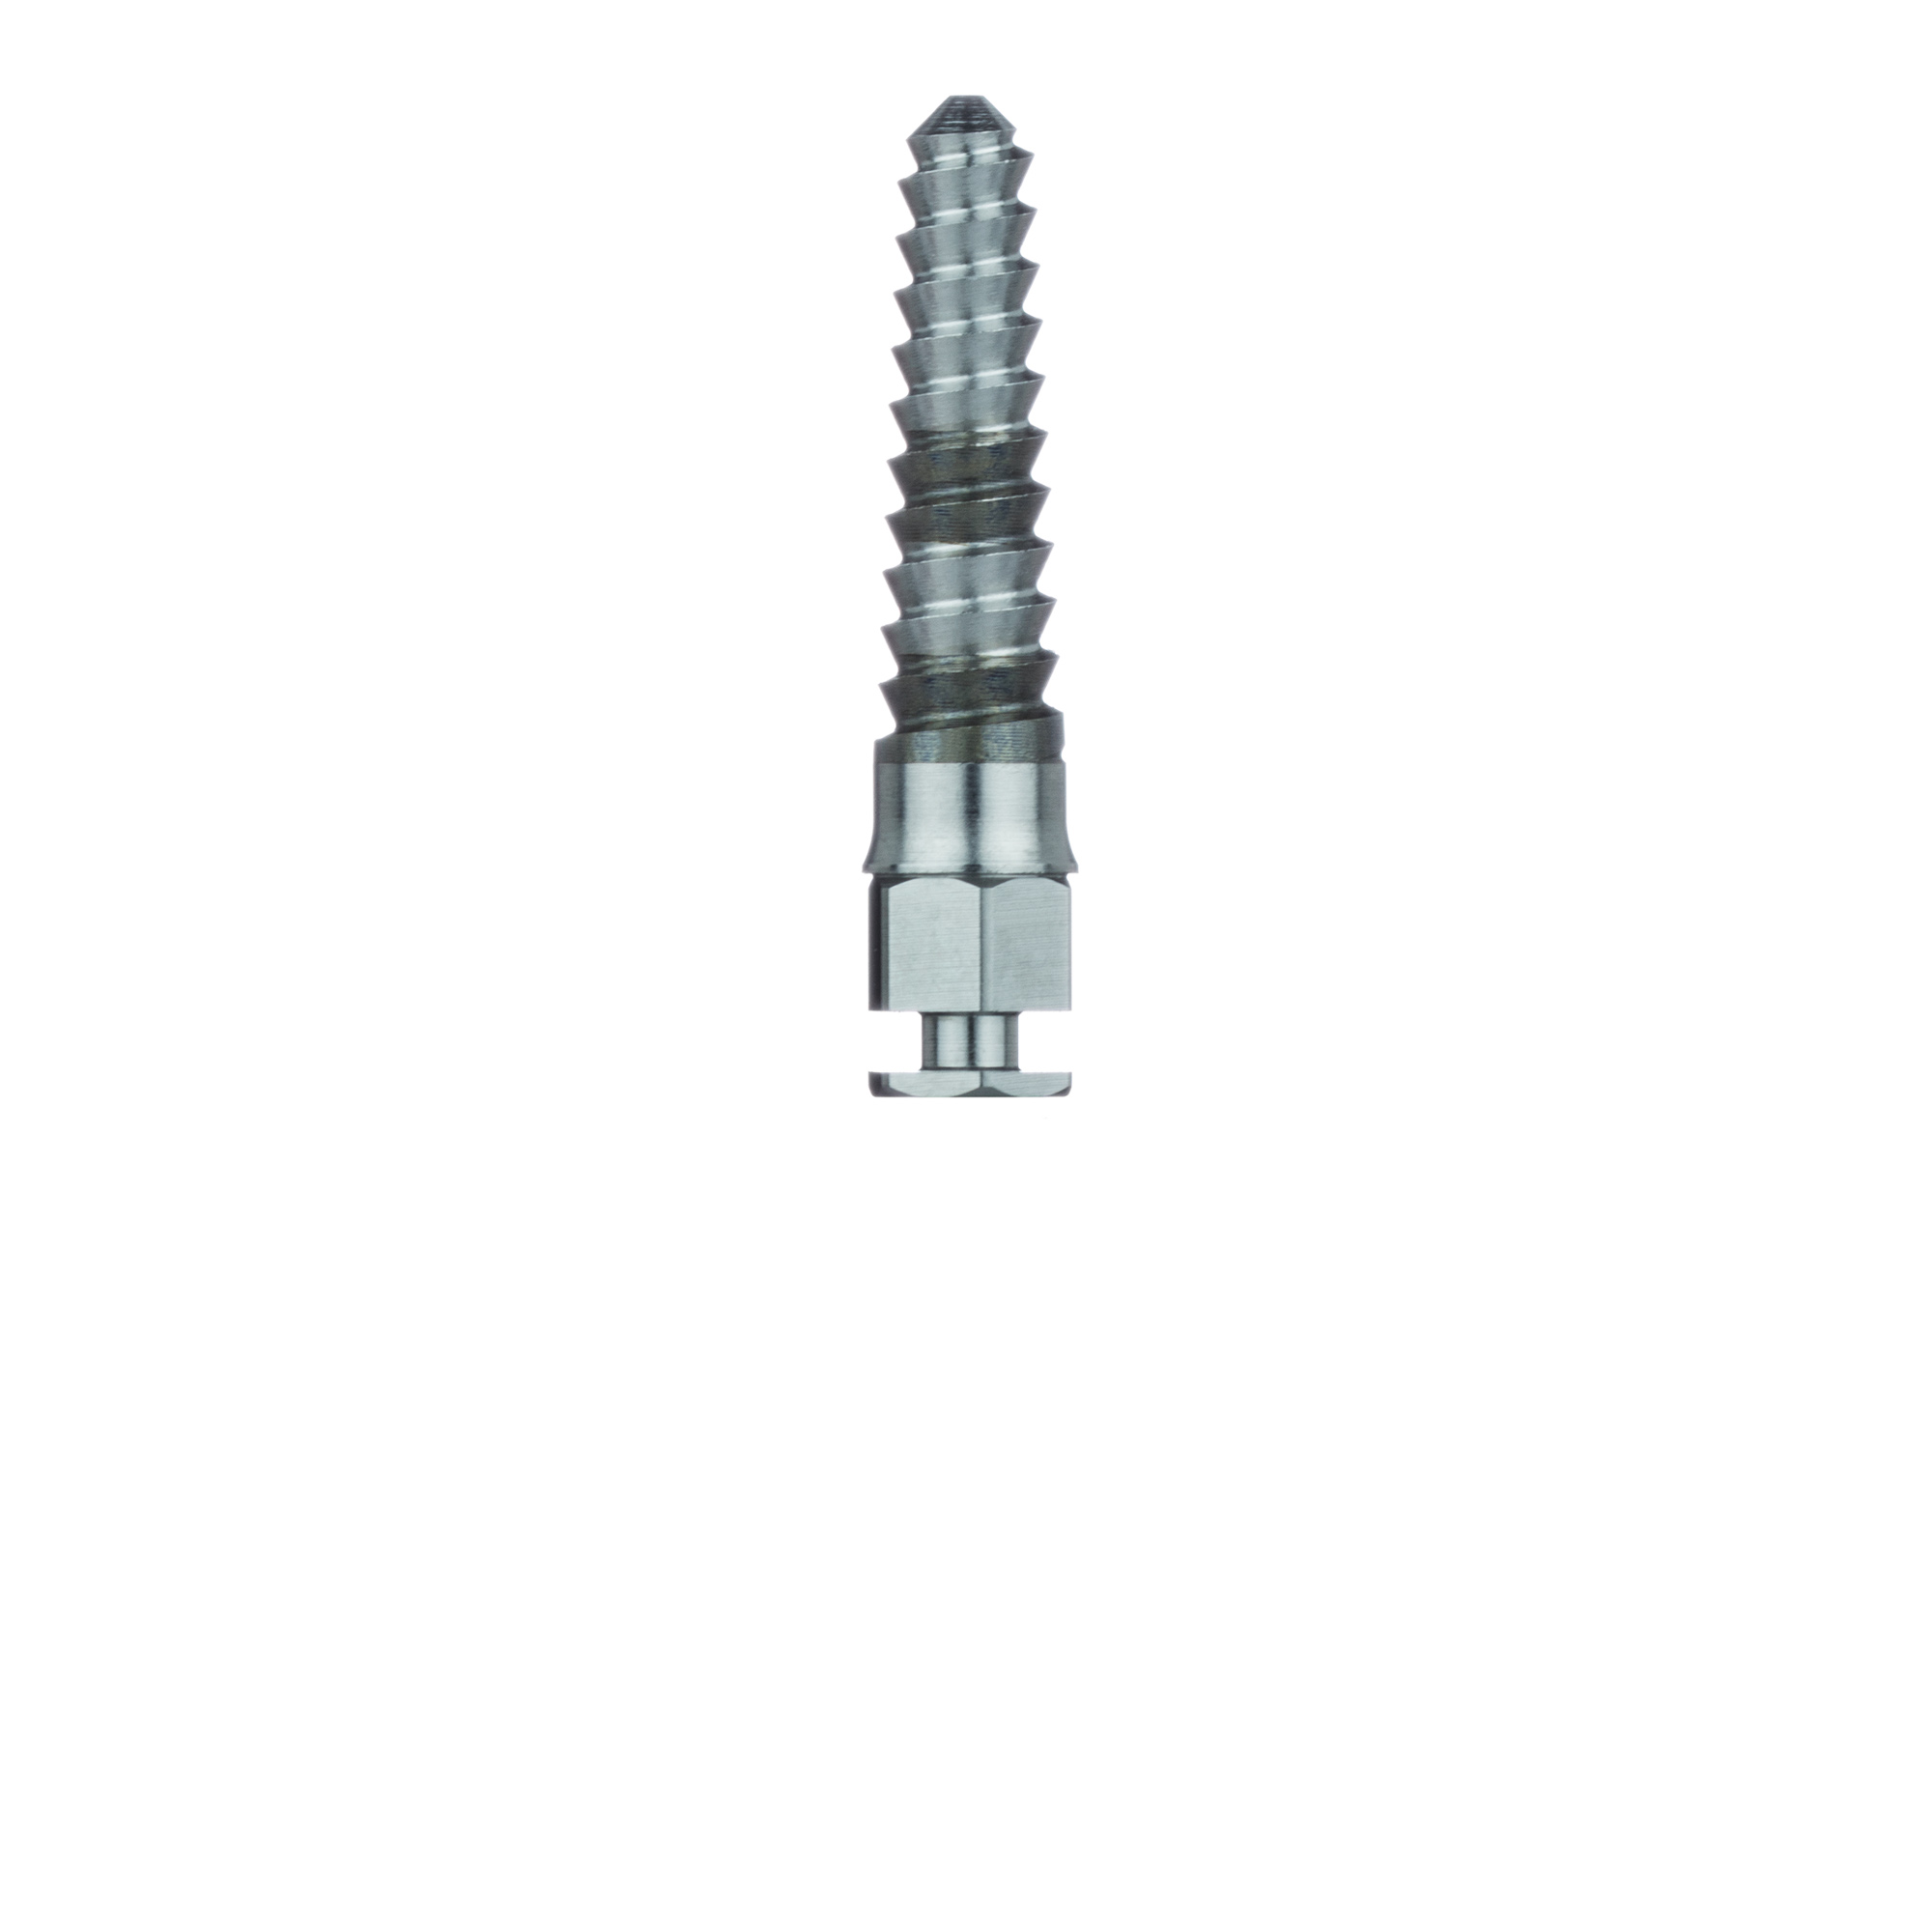 E2005 Surgery, Expansion Spreader, 3.5mm X 12mm